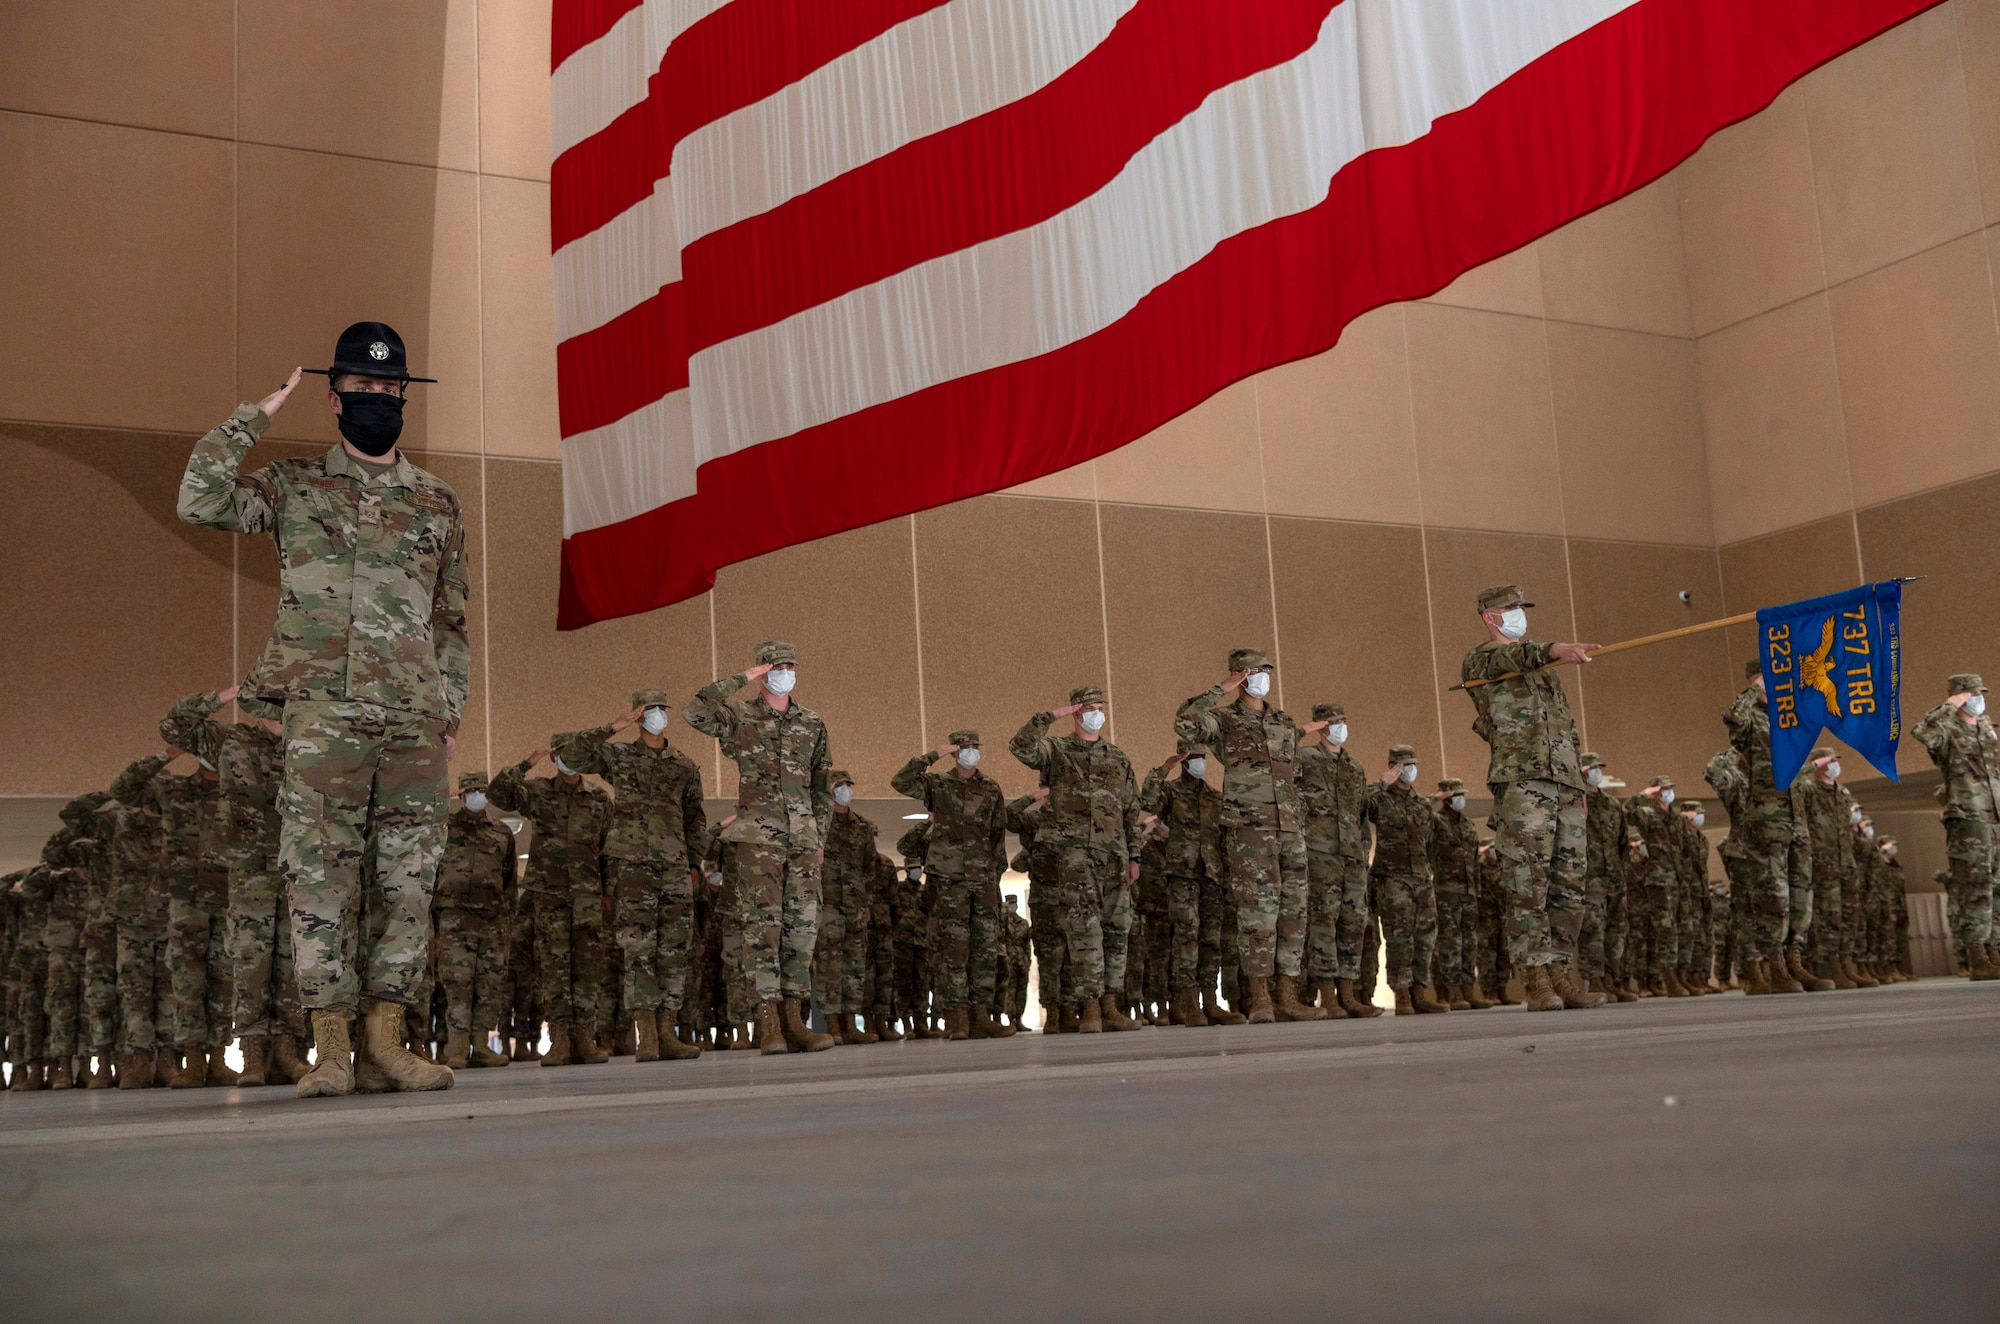 U.S. Air Force basic military graduation is held Apr. 9, 2020, at the 321st Training Squadron’s Airman Training Complex on Joint Base San Antonio-Lackland, Texas.